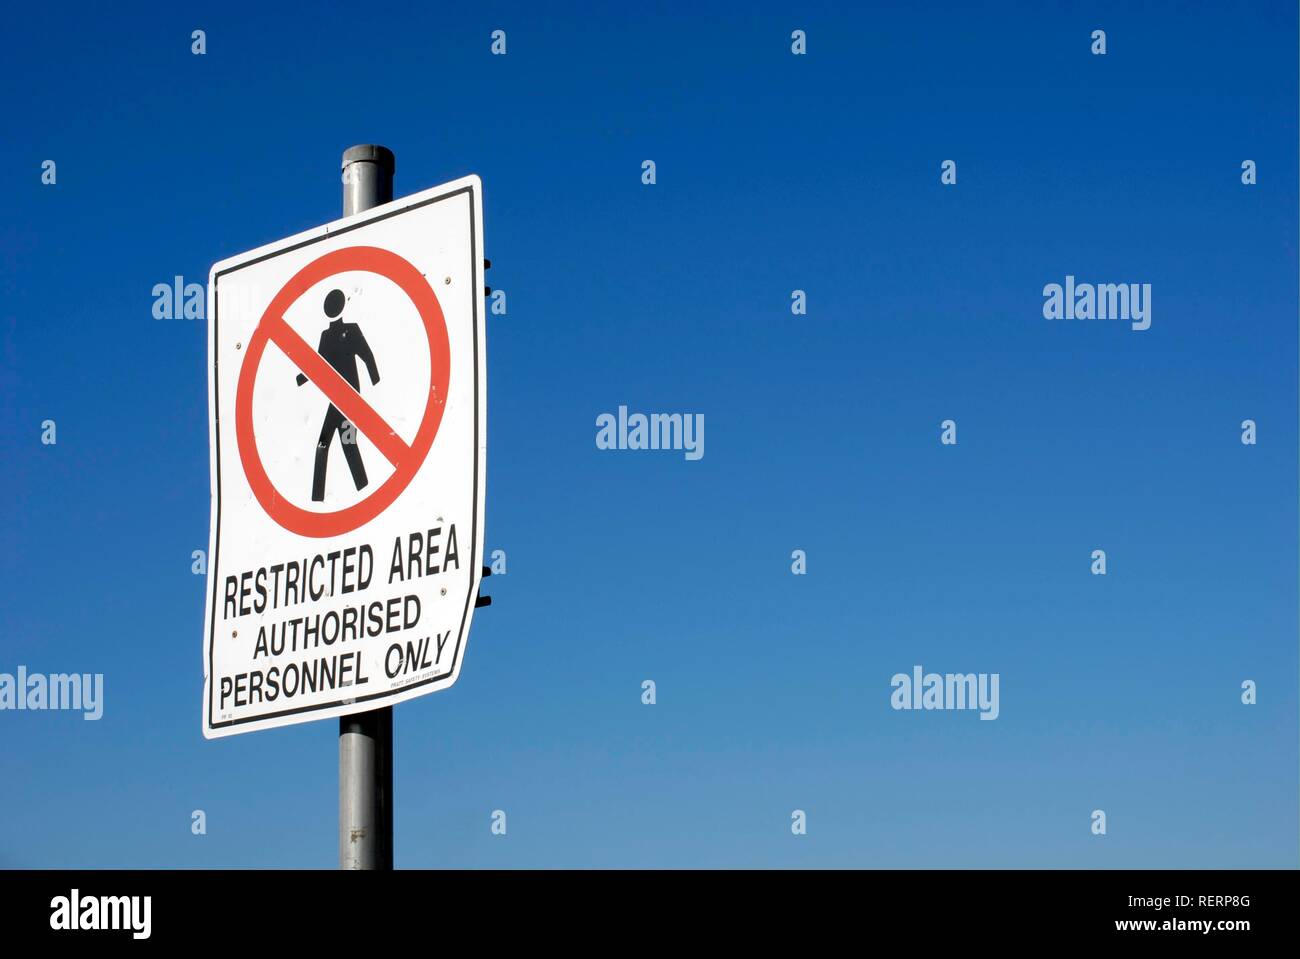 Sign indicating an area for authorised personnel only Stock Photo